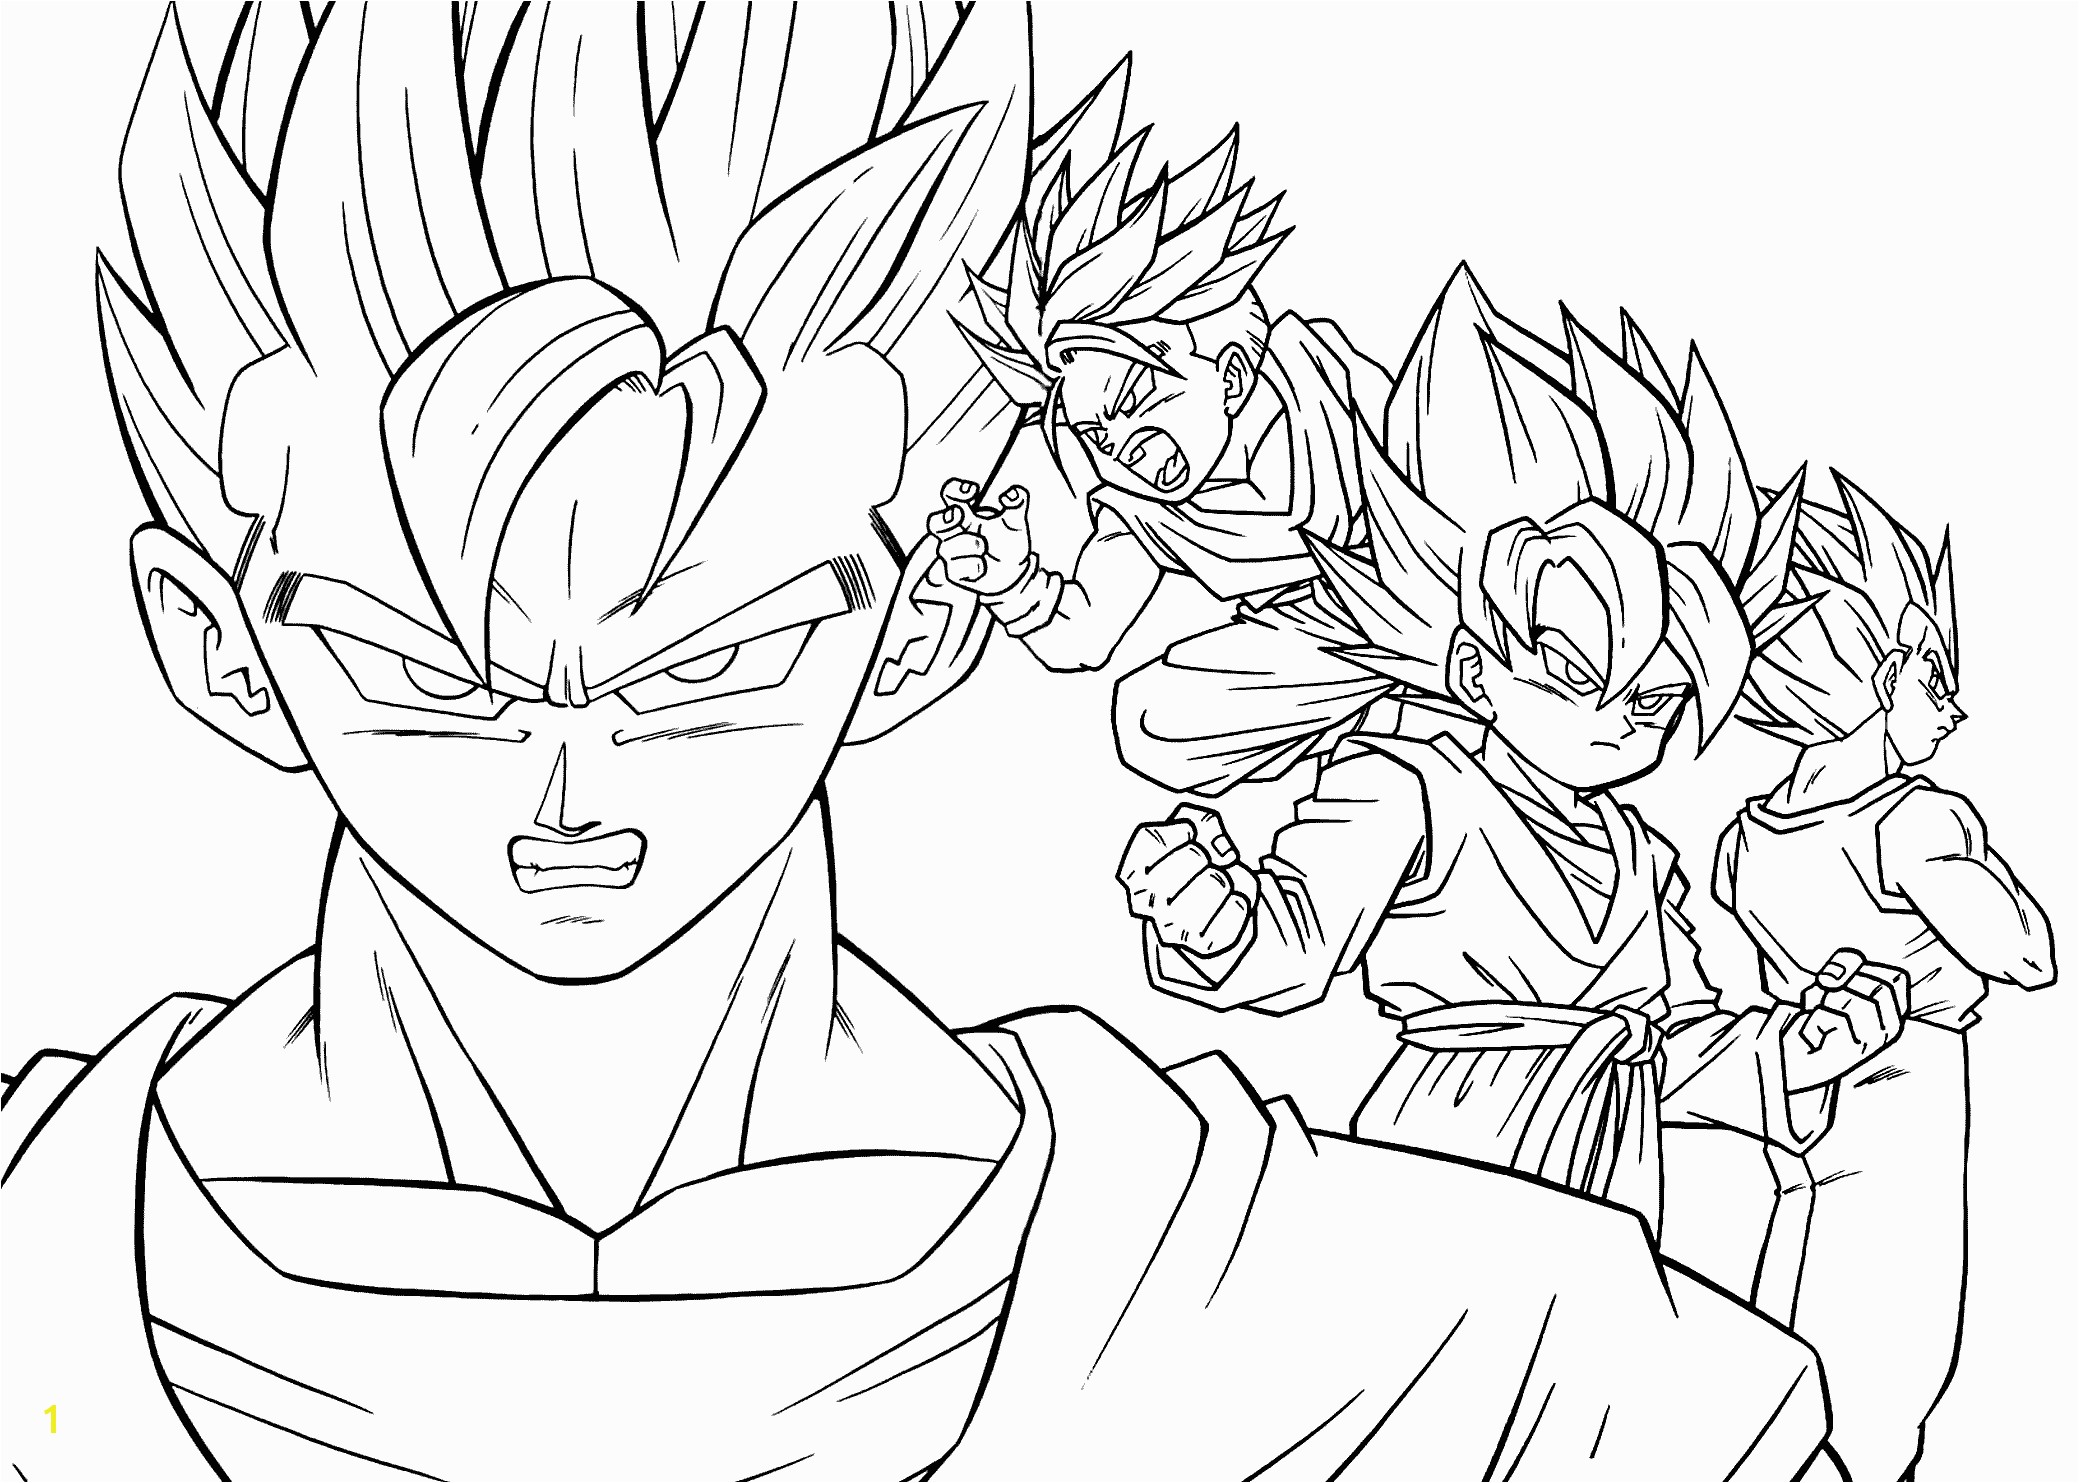 Dragon Ball Z Coloring Pages Ve a And Goku Printable Dbz coloring pages for adults